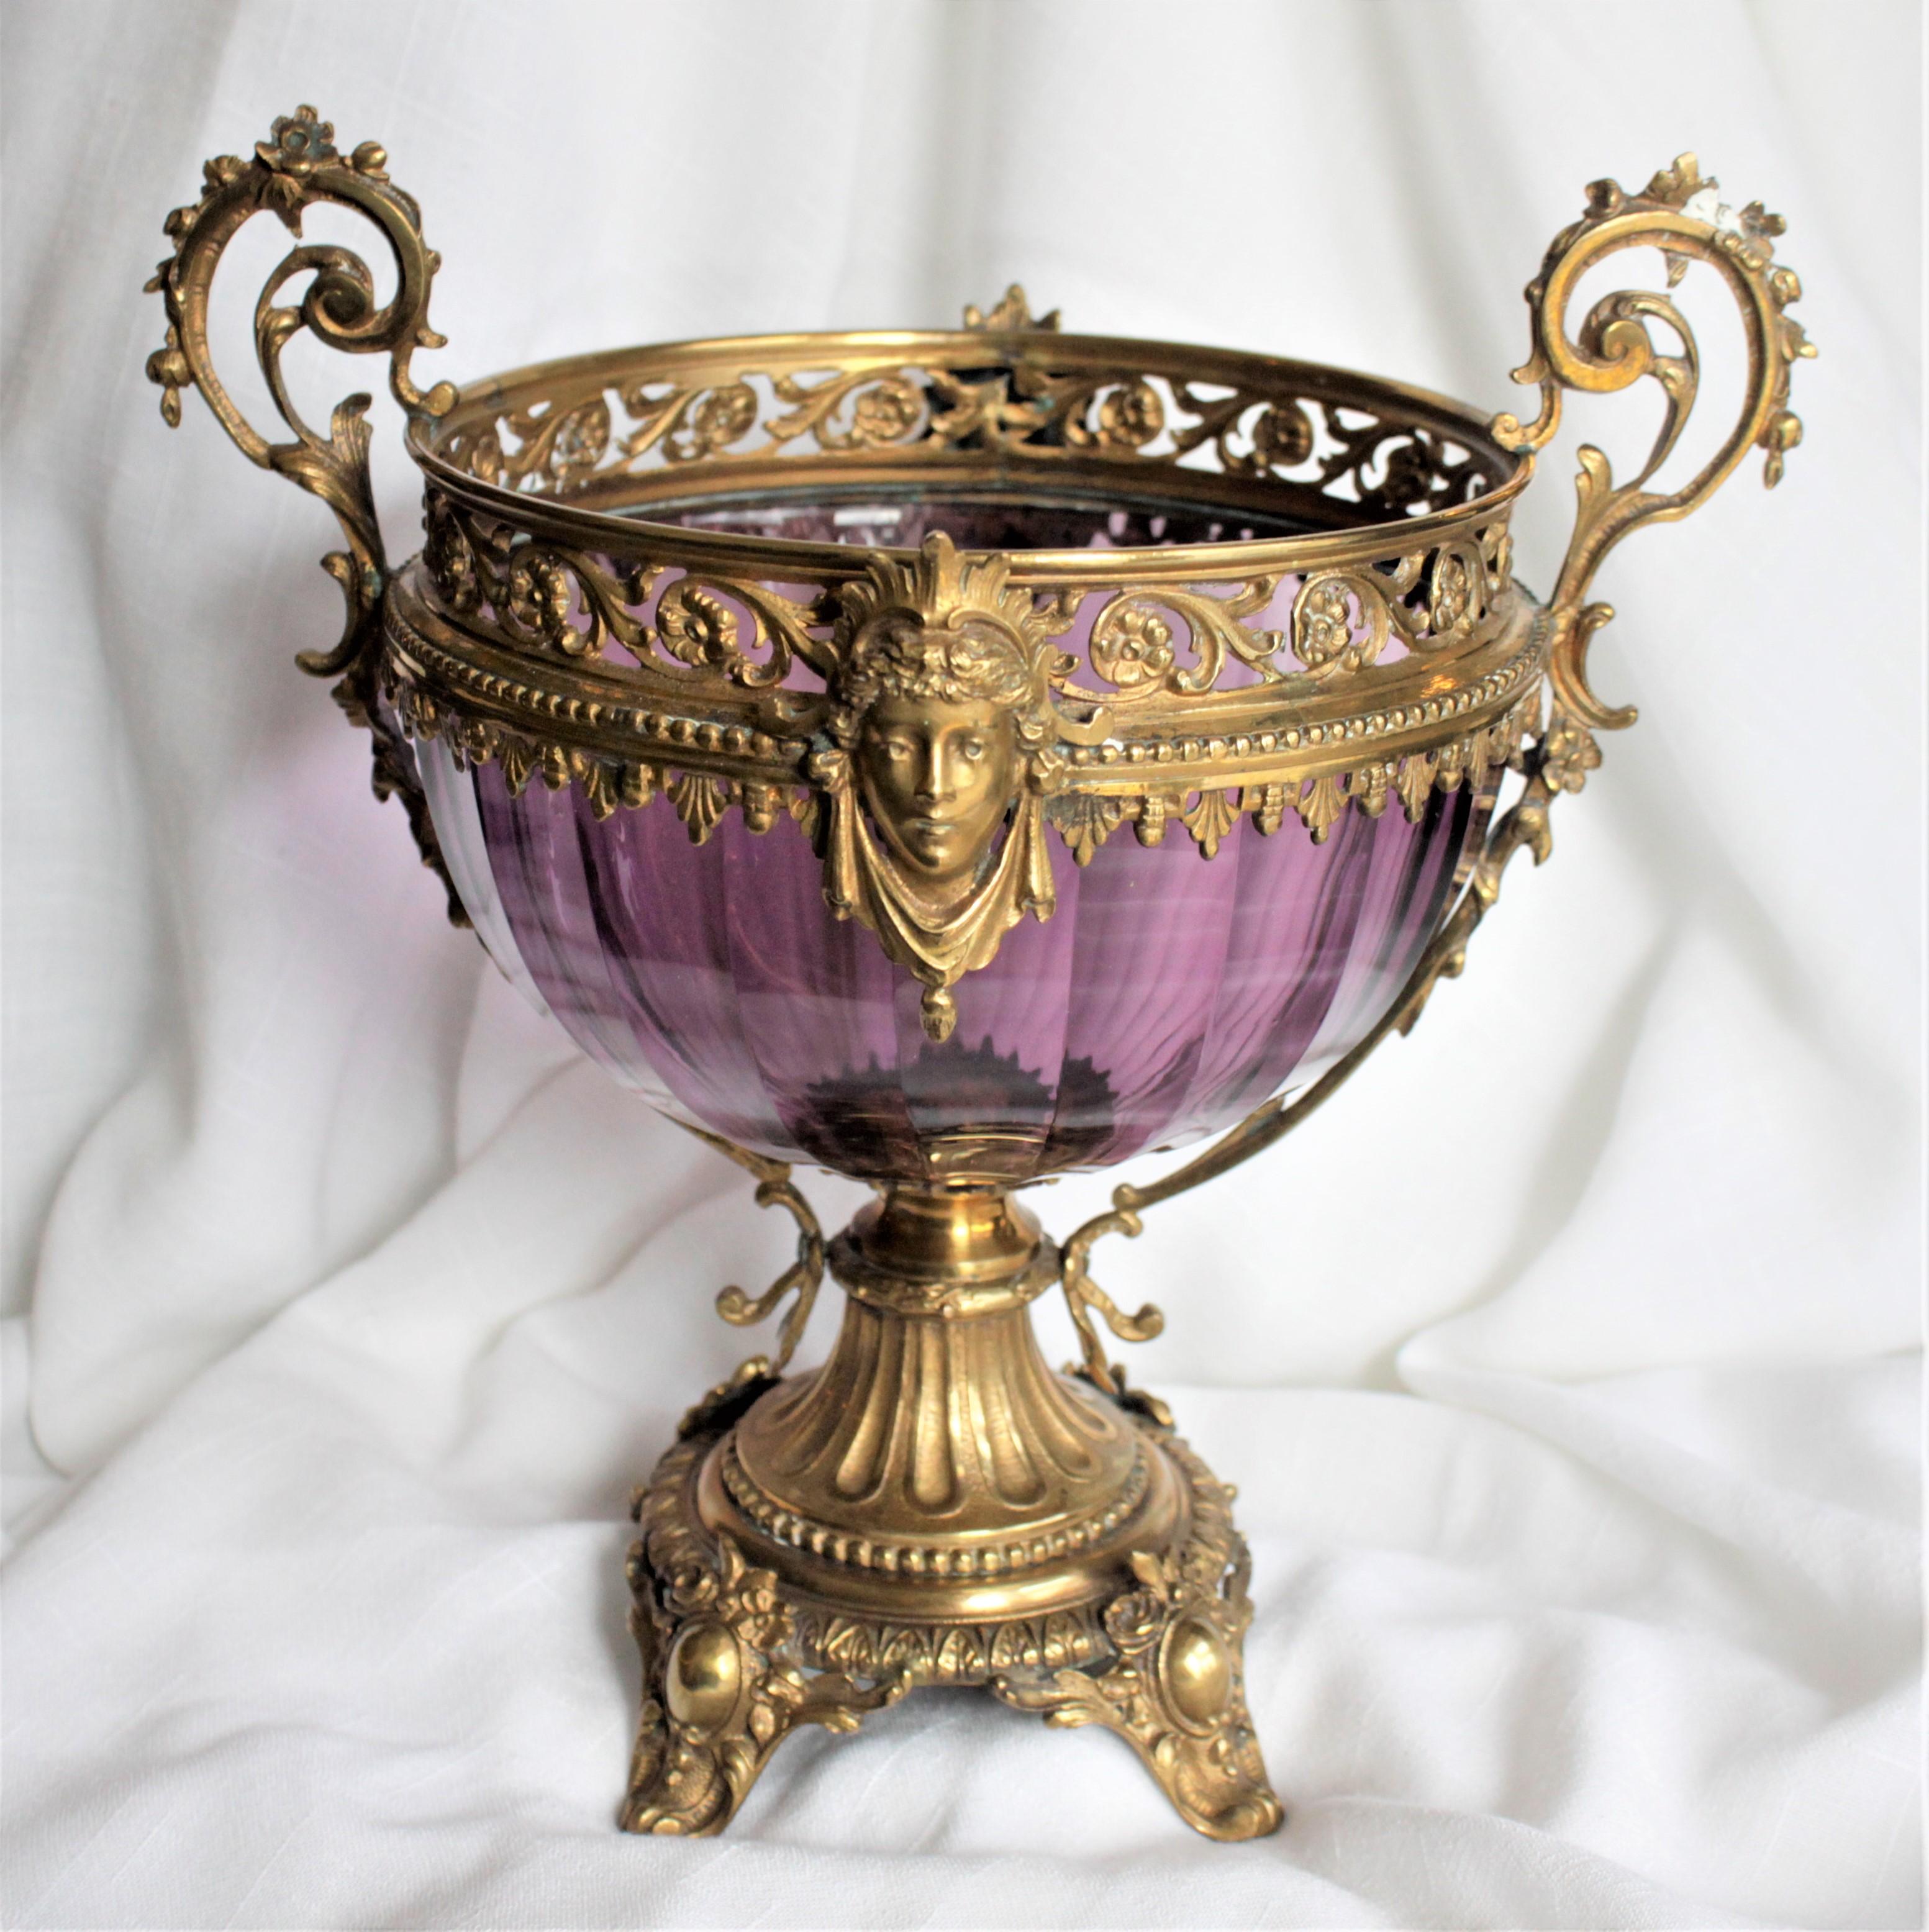 This antique amethyst glass pedestal vase is unmarked but presumed to have been made in England in circa 1880 in the Victorian style. This compote features very elaborate and ornate gilt bronze mounts with large scrolled handles and a footed base.